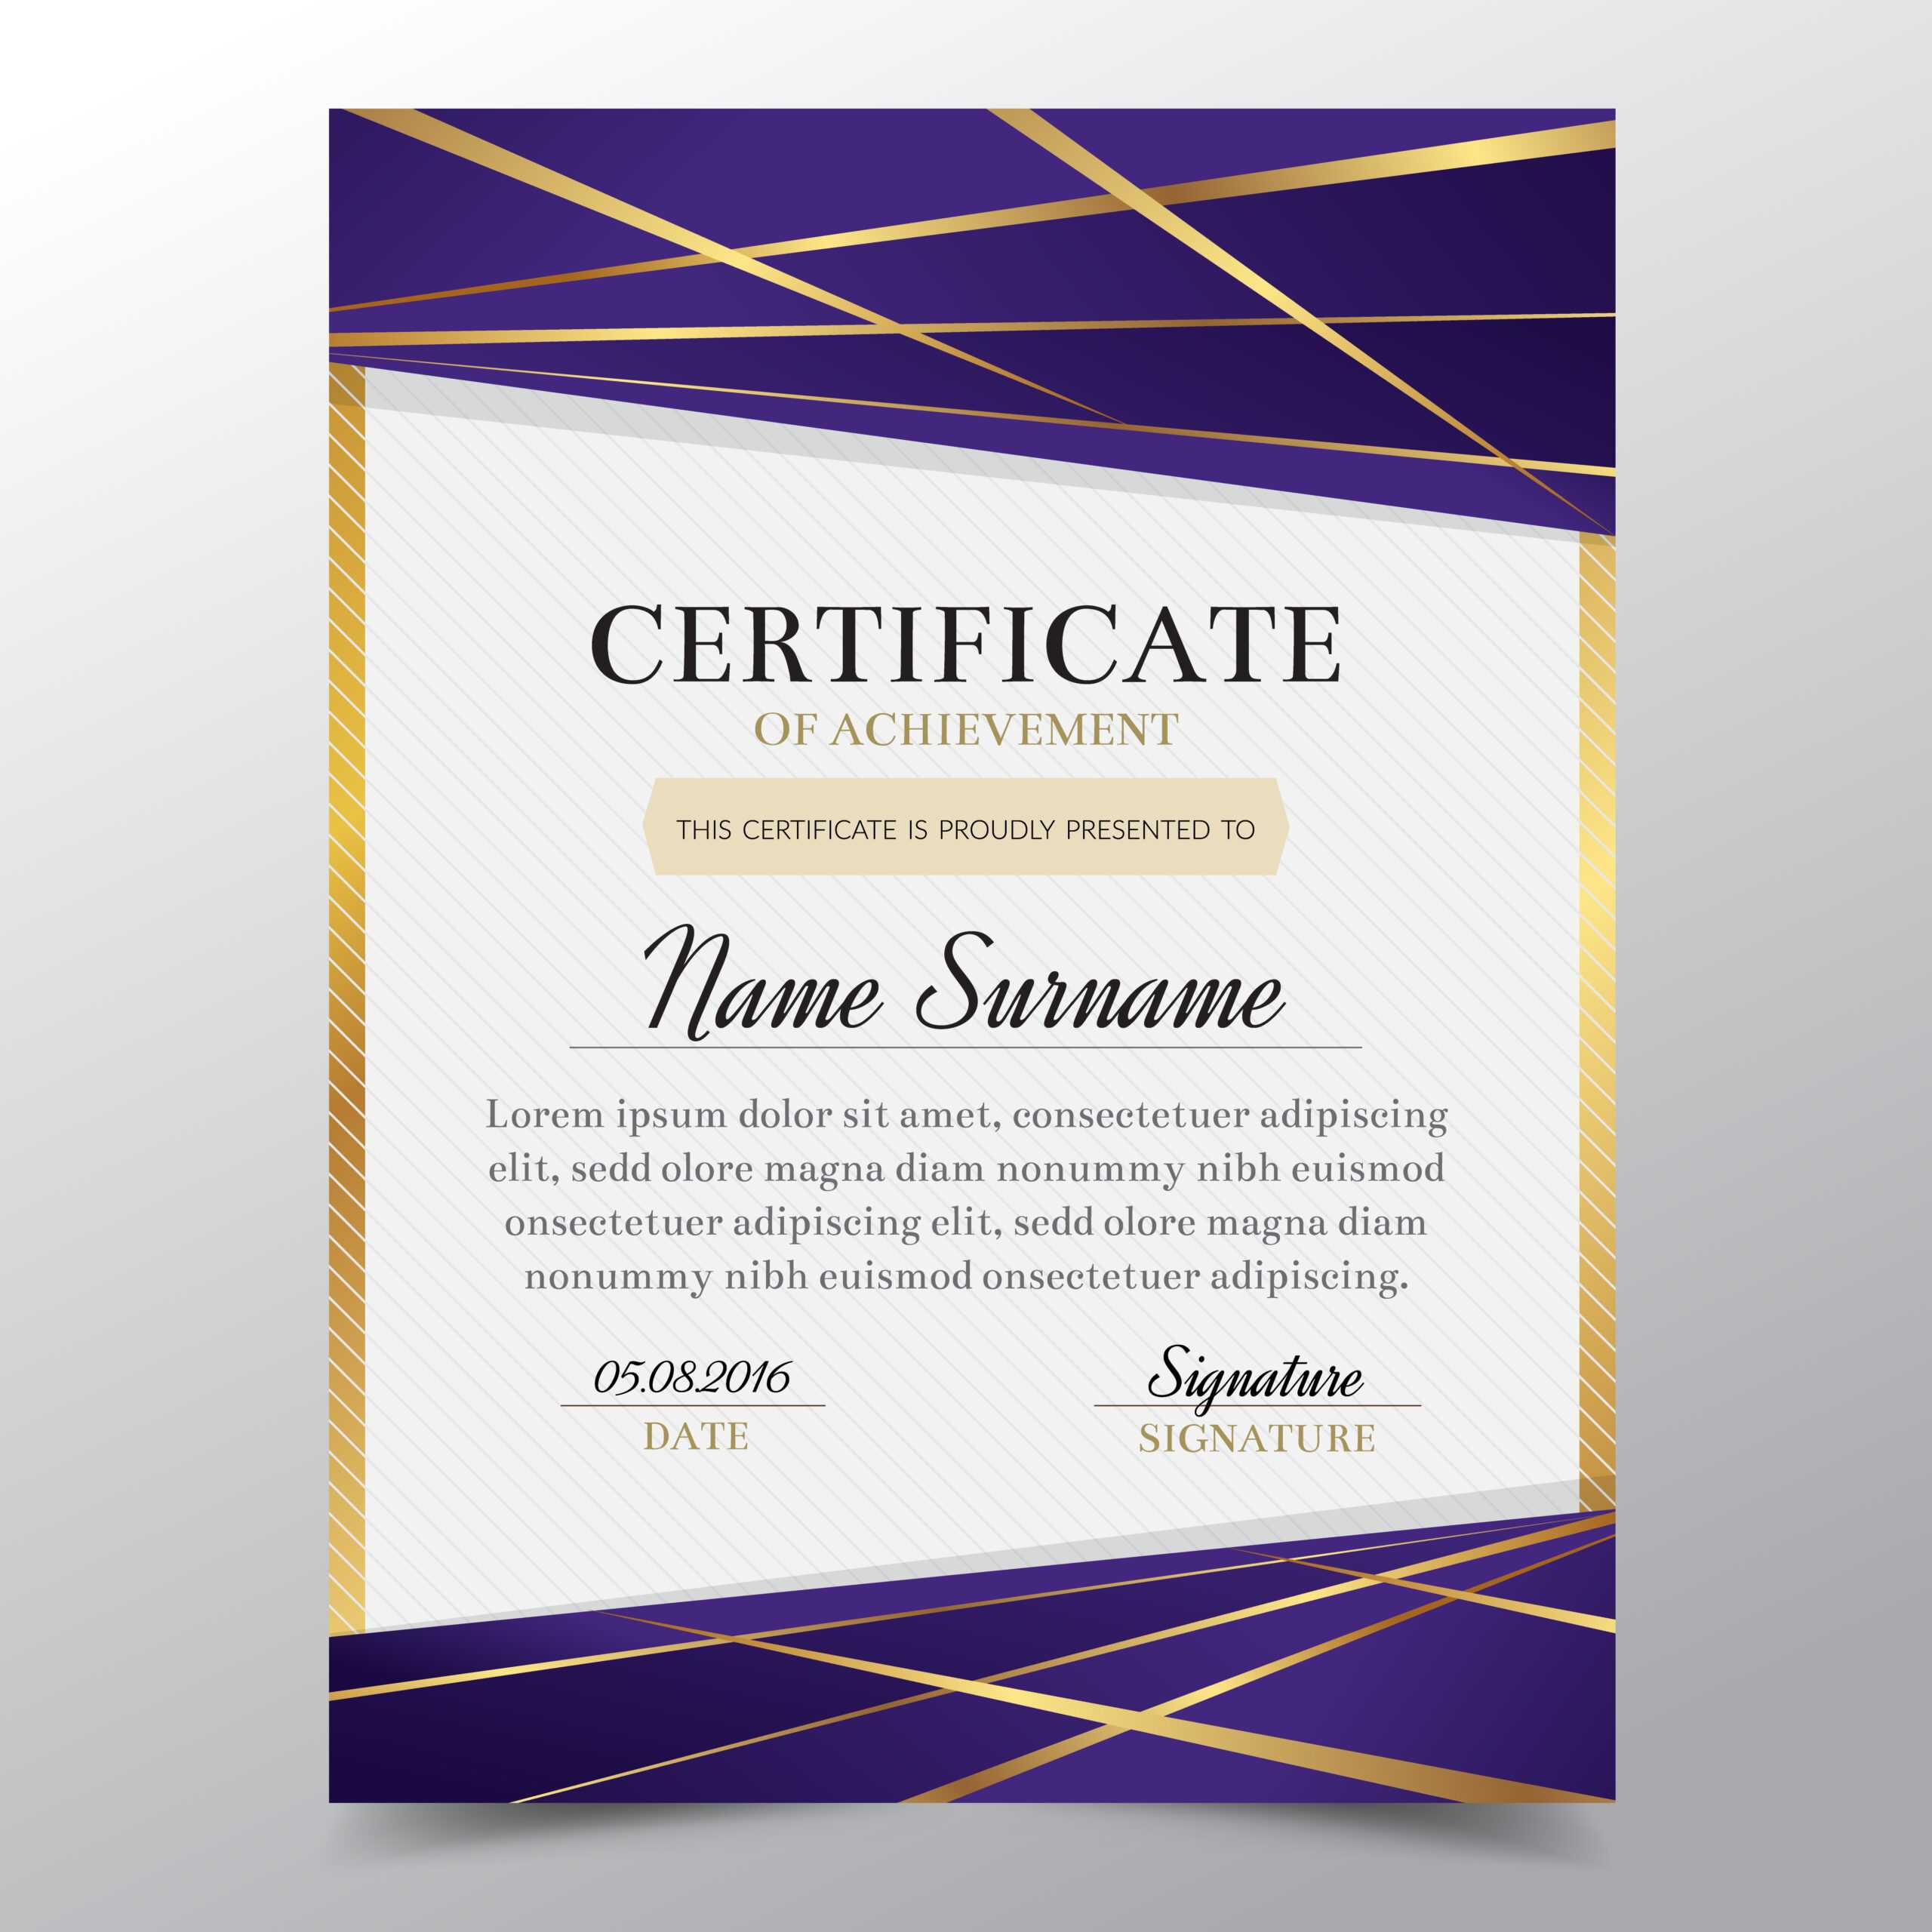 Certificate Template With Luxury Golden And Purple Elegant Pertaining To Award Certificate Design Template